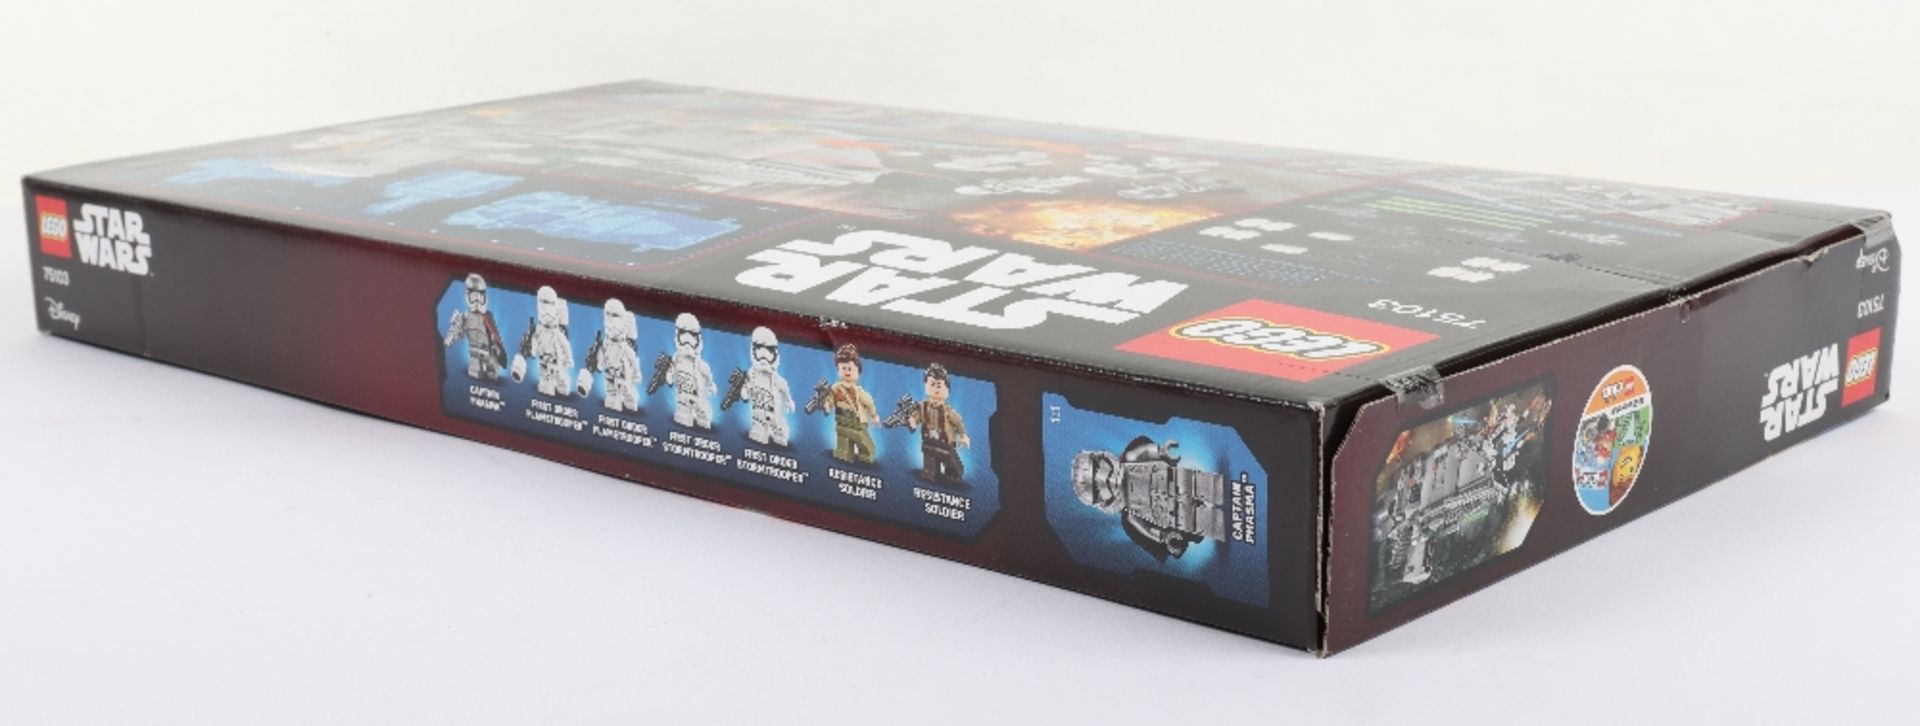 Lego Star Wars 75103 and 5002948 sealed boxed sets - Image 7 of 11